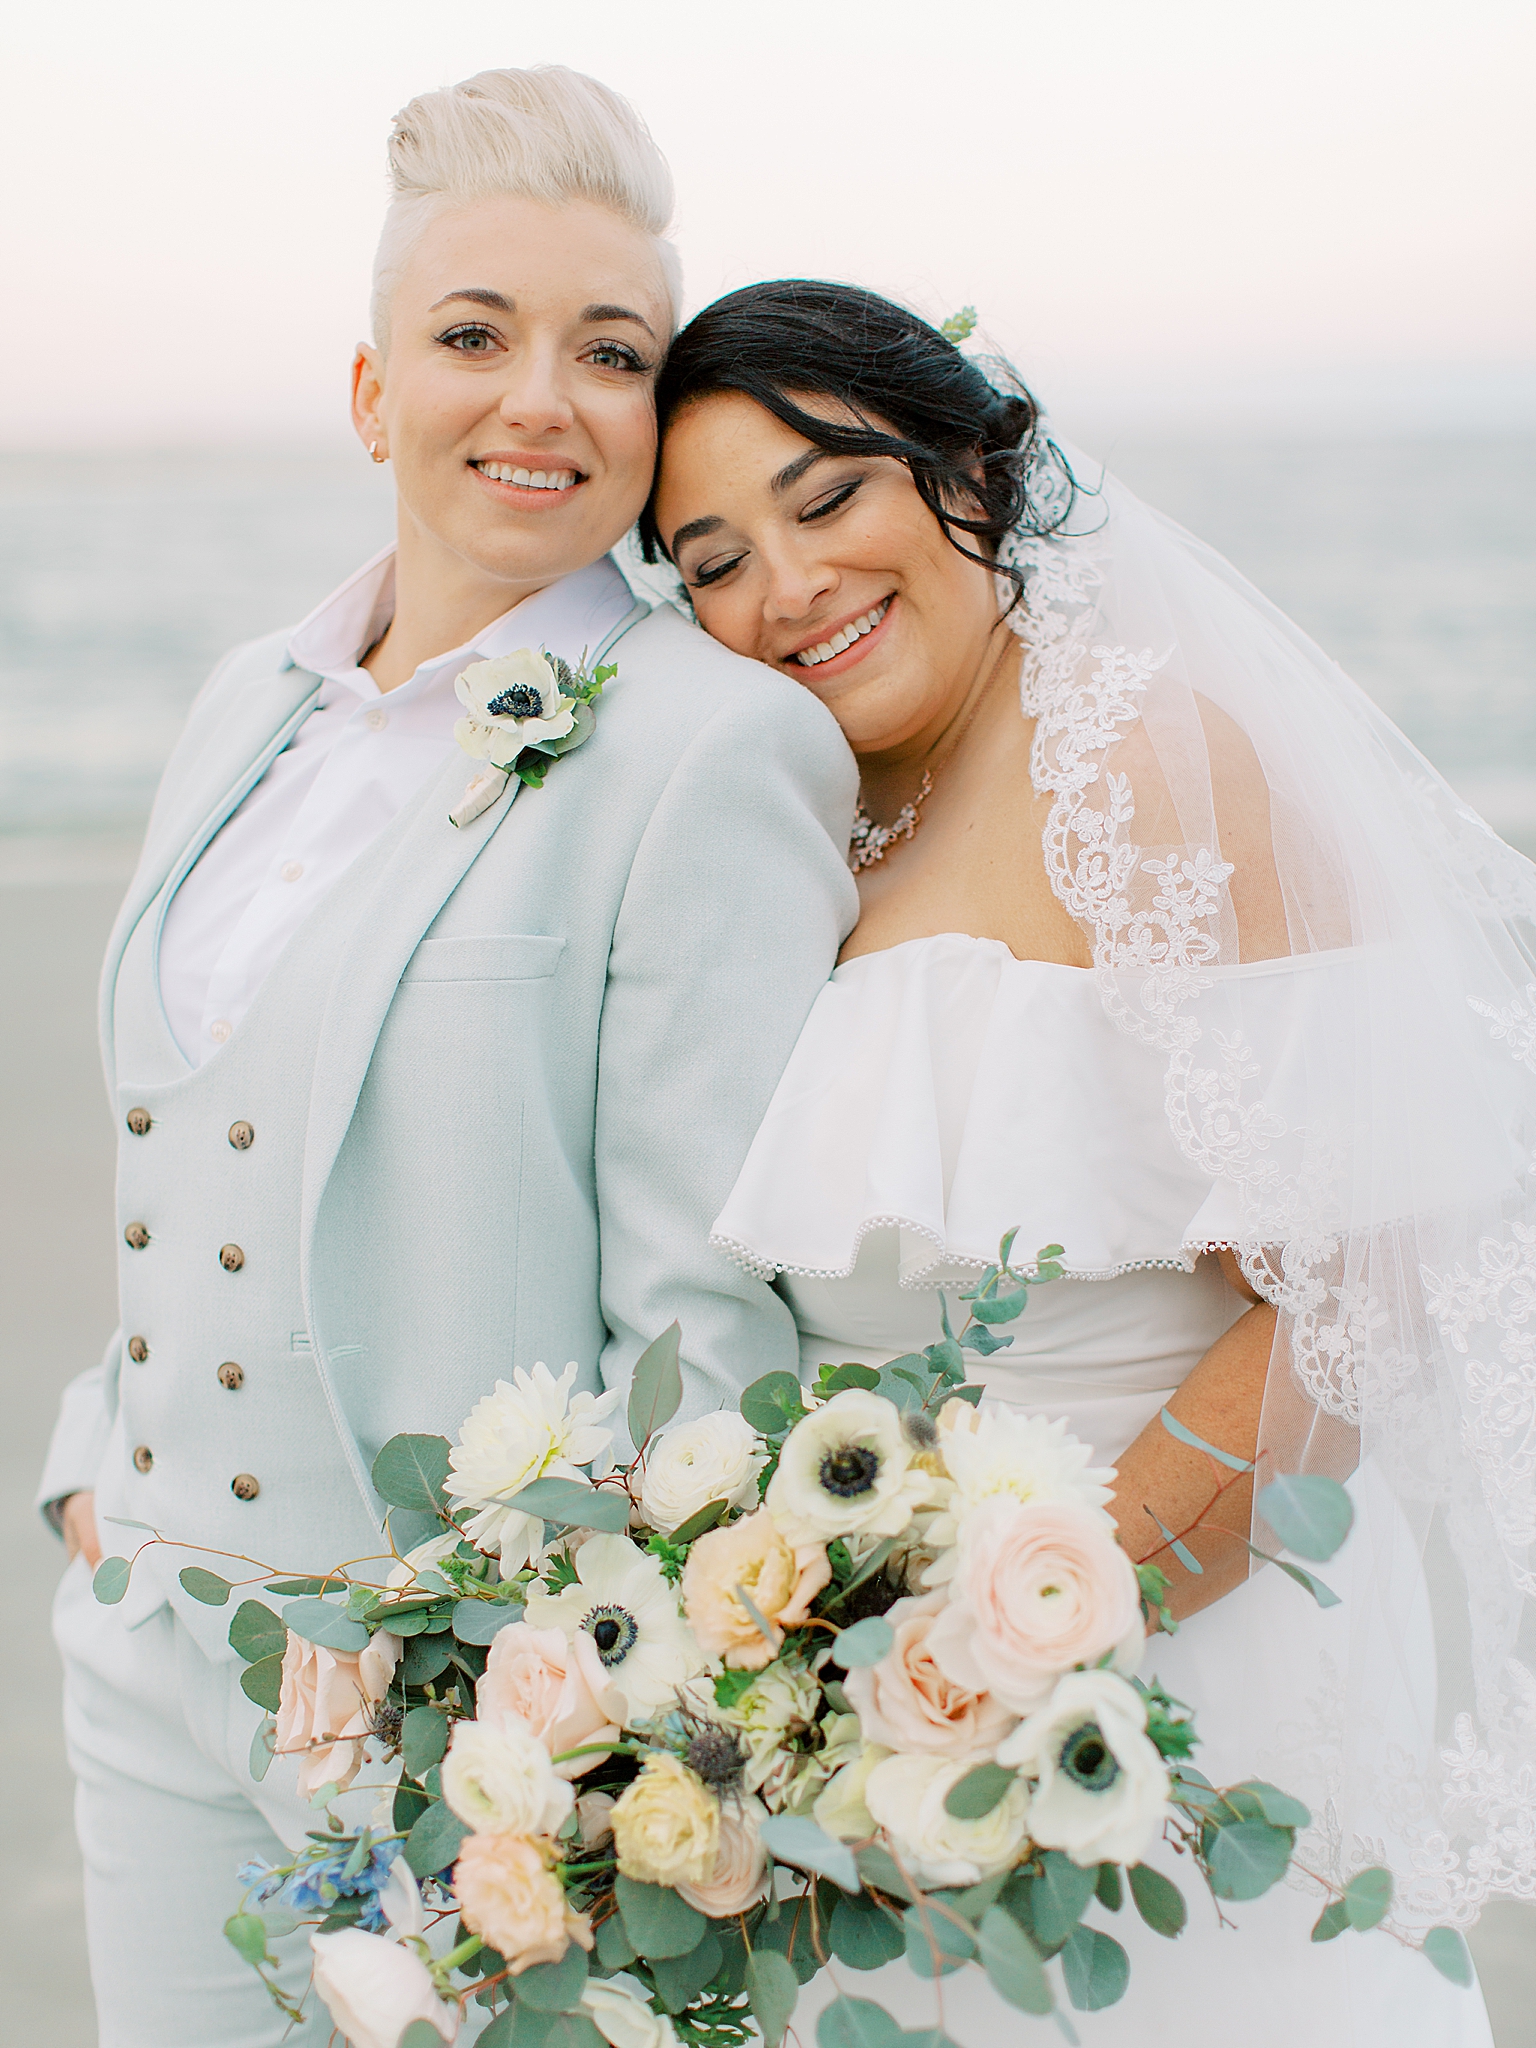 bride leans on partner's shoulder during photos on beach